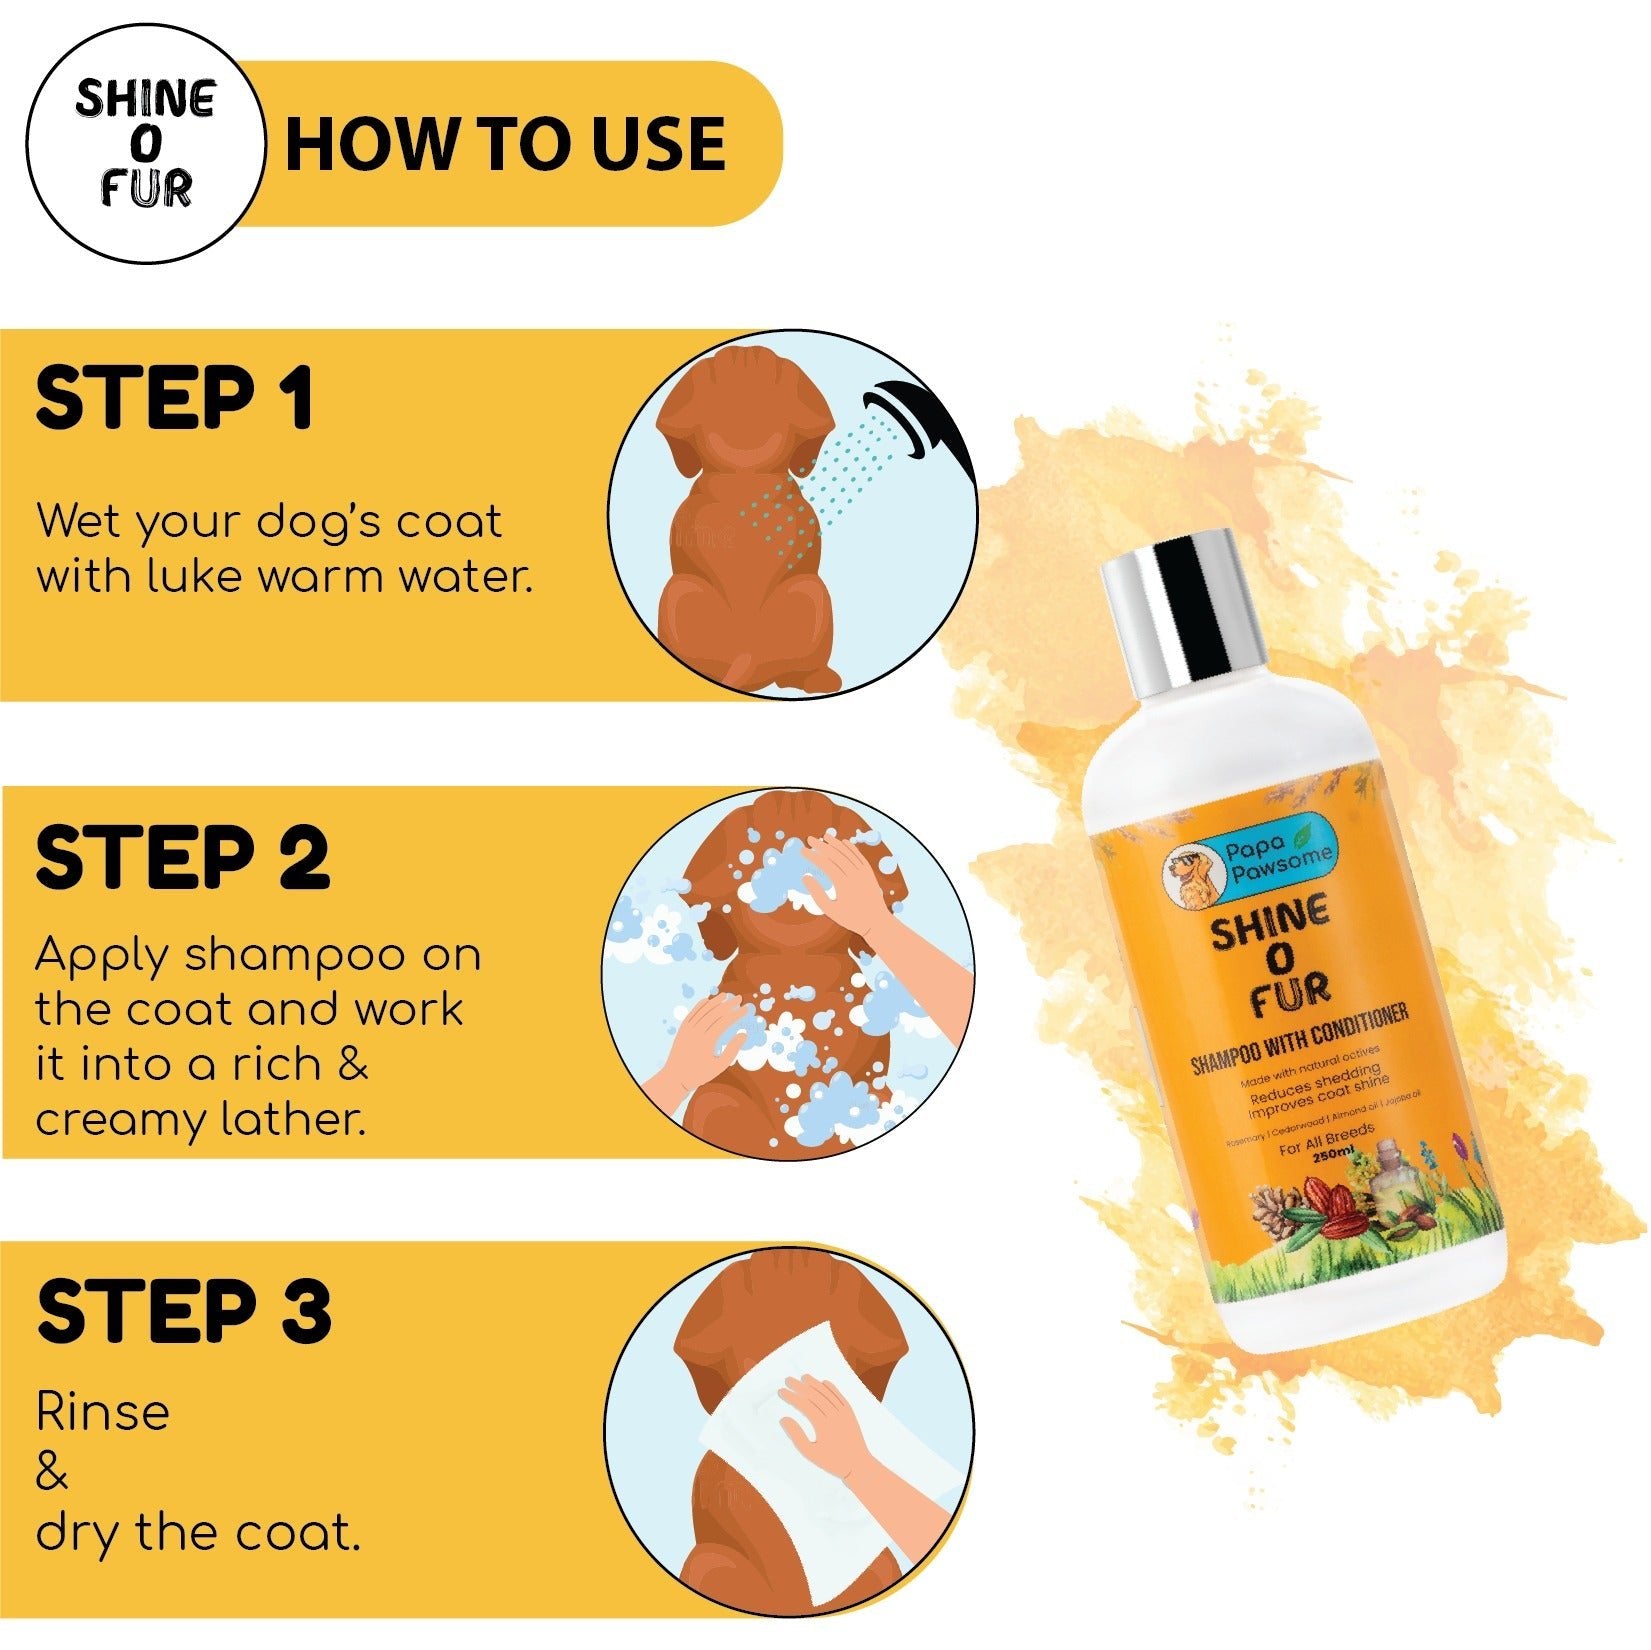 Instructions for use: Wet your dog's coat with lukewarm water, apply shampoo on the coat, and work it into a rich lather. Rinse and dry the coat.